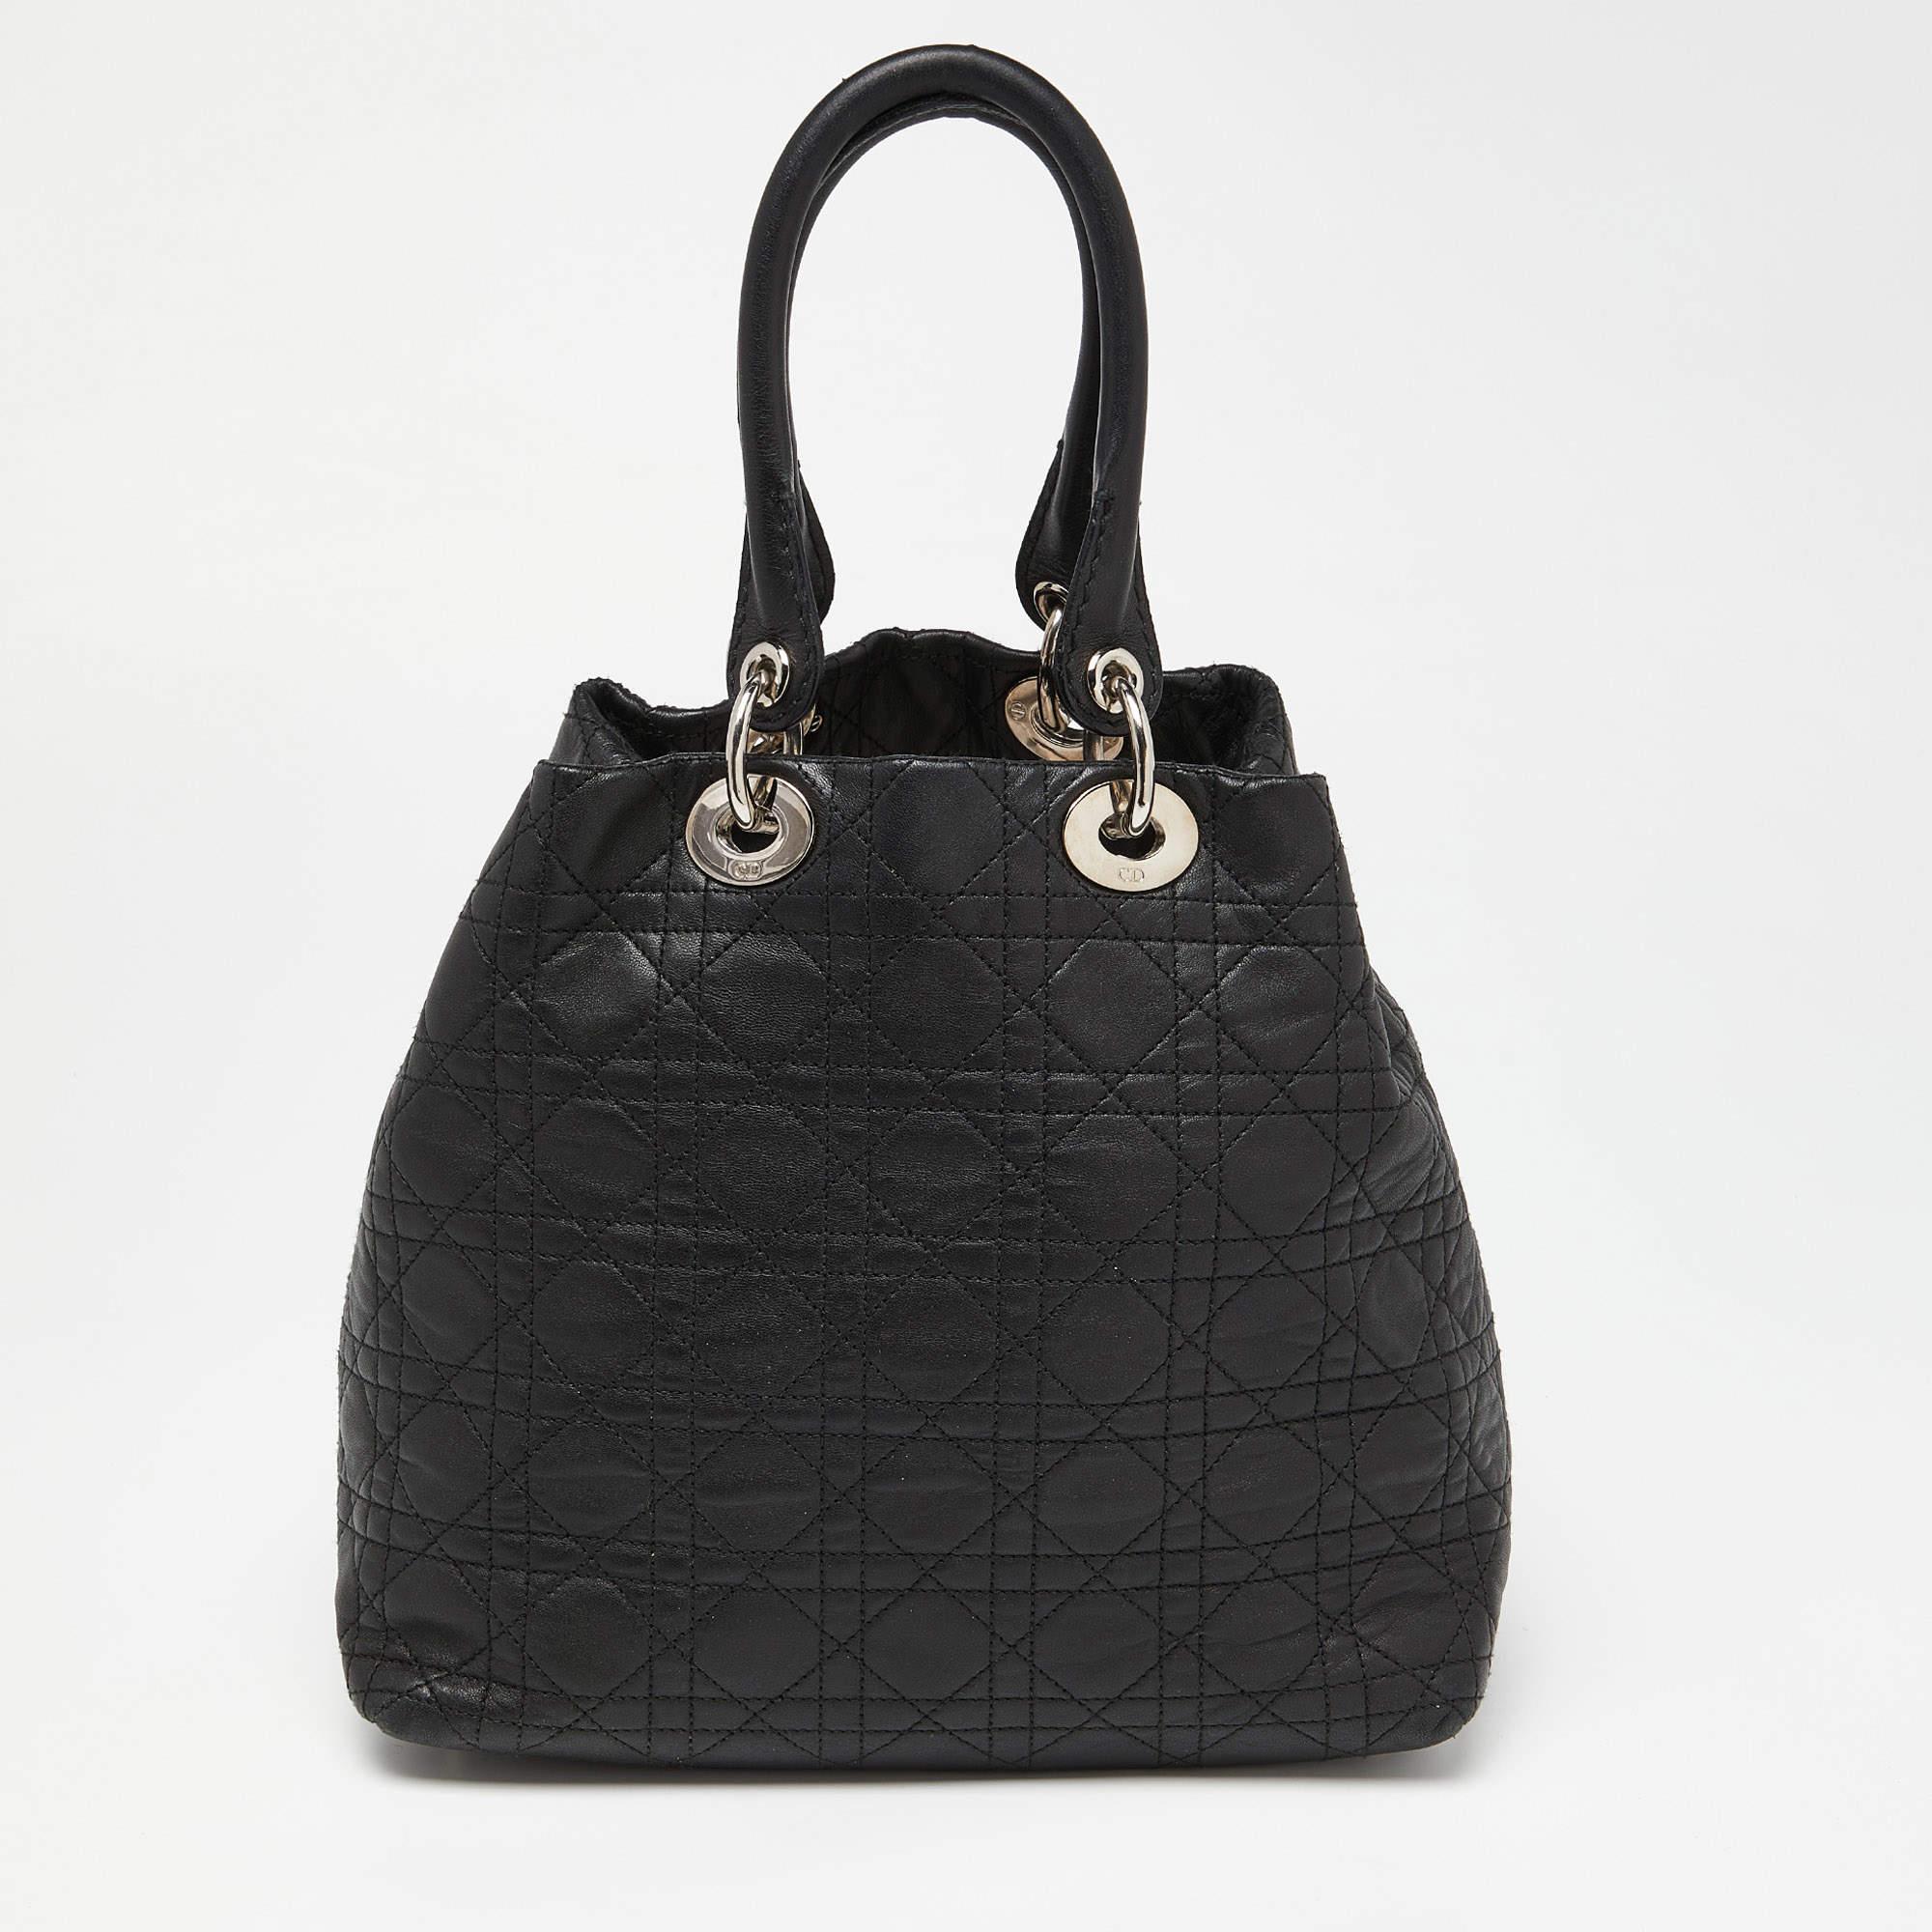 Perfect for work or travel, this Dior tote is made of Cannage leather to be classy and durable. It has dual handles, letter charms, and a nylon-lined interior.

